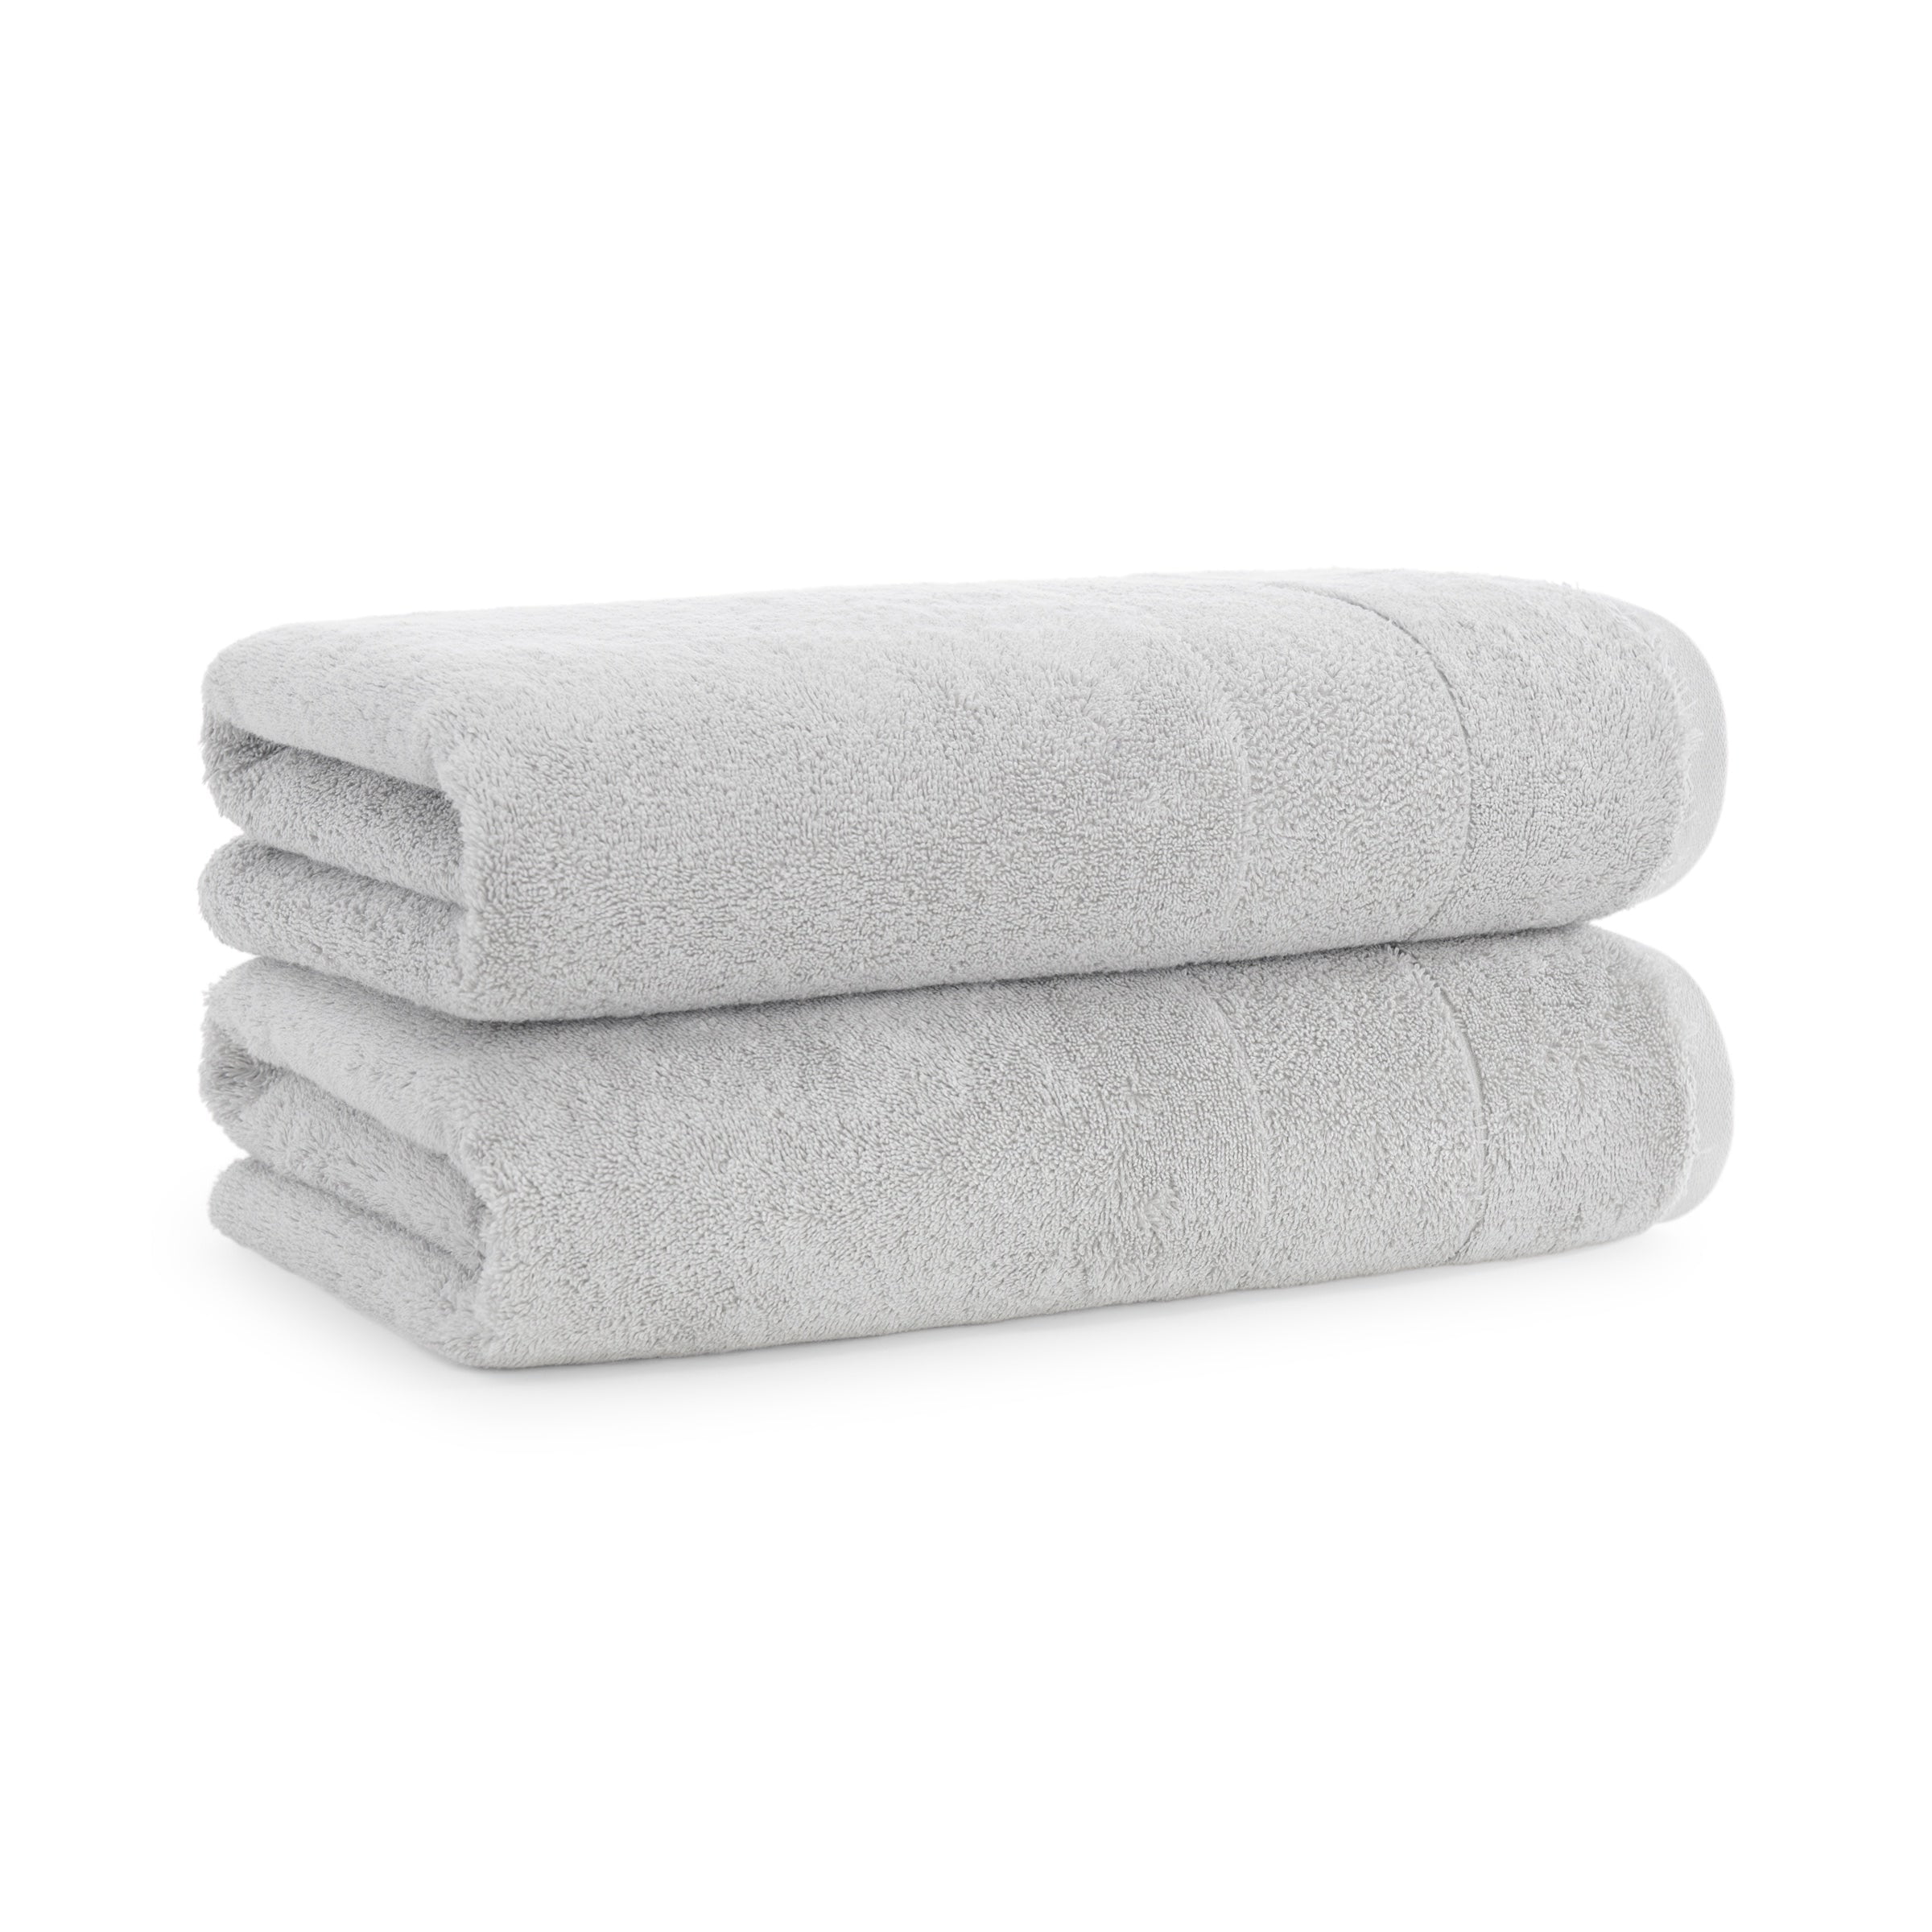 Luxury Turkish Bath Towels, 2-pack, Oversized 30x60, 600 GSM, Soft, Plush,  Aston & Arden Bathroom Towels, Solid Color Options -  Israel